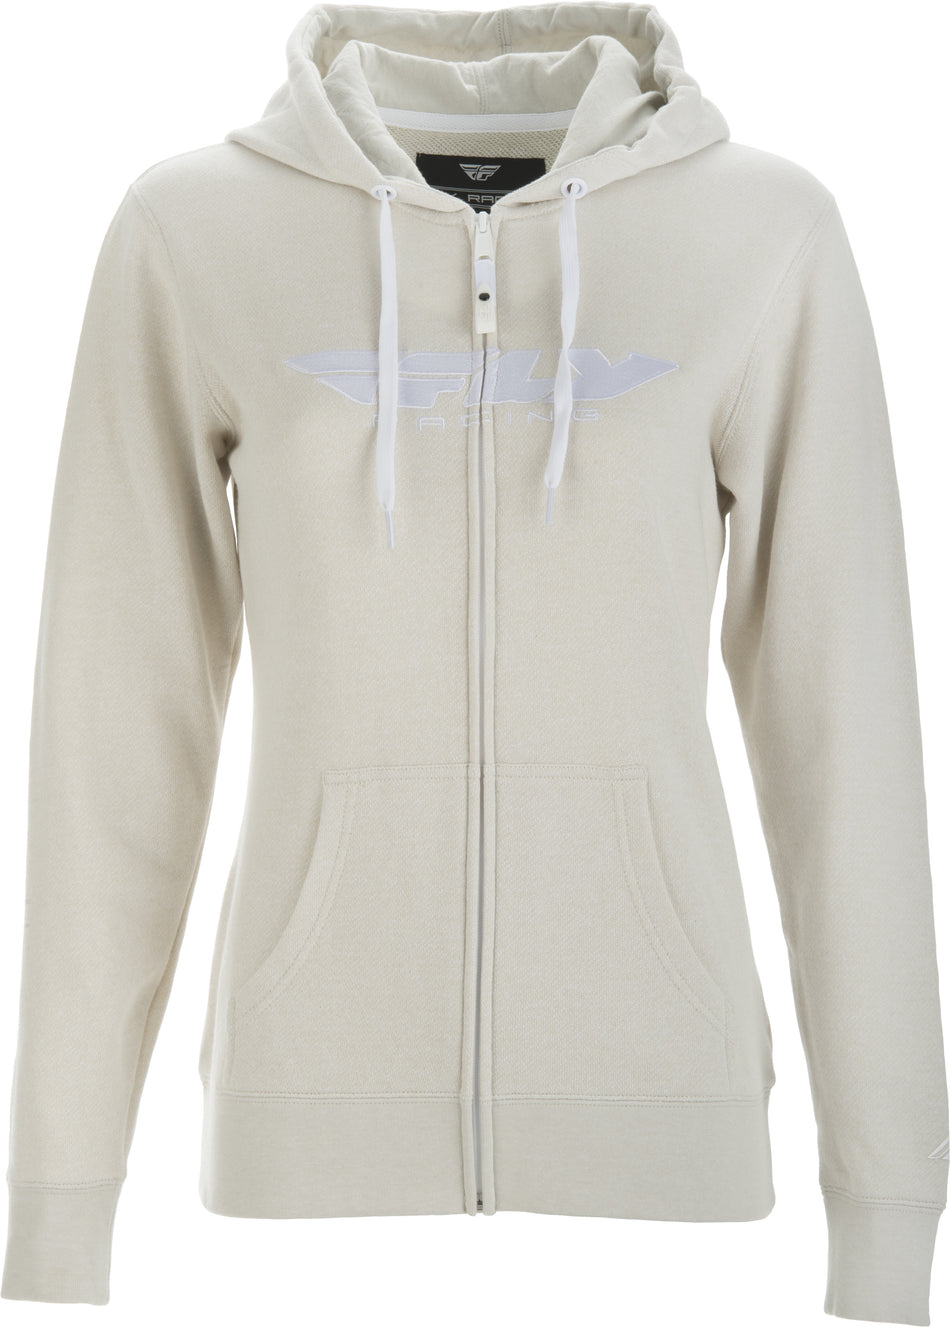 FLY RACING Fly Women's Corporate Zip Up Hoodie Ivory Md 358-5094M